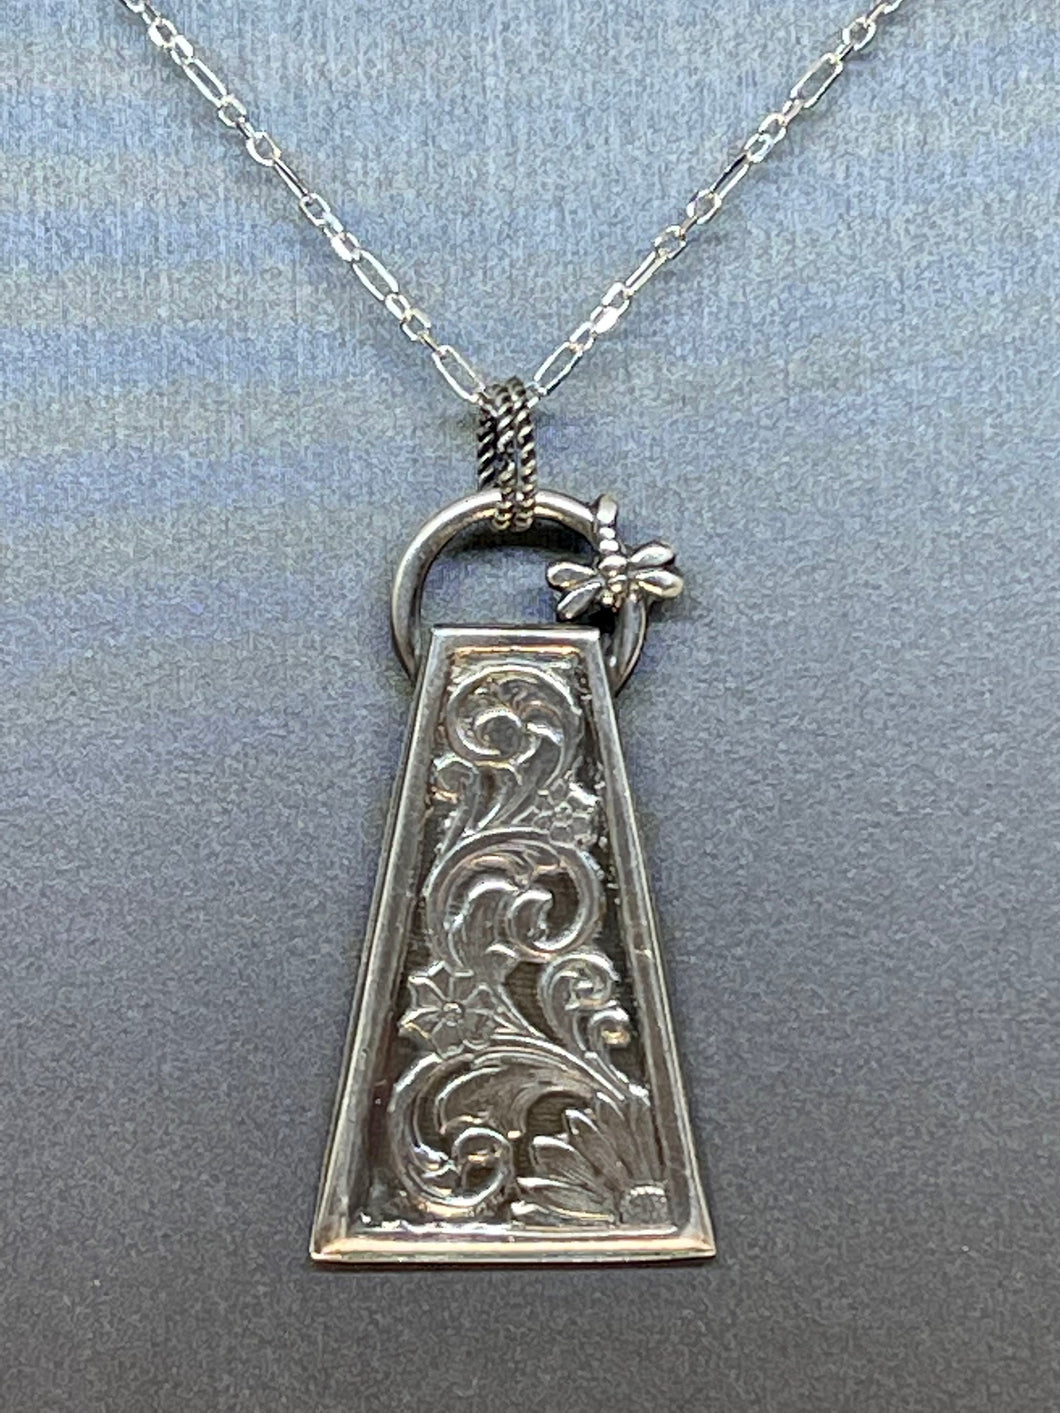 Argentium Silver Floral Pendant with Dragonfly Semicircle on Top